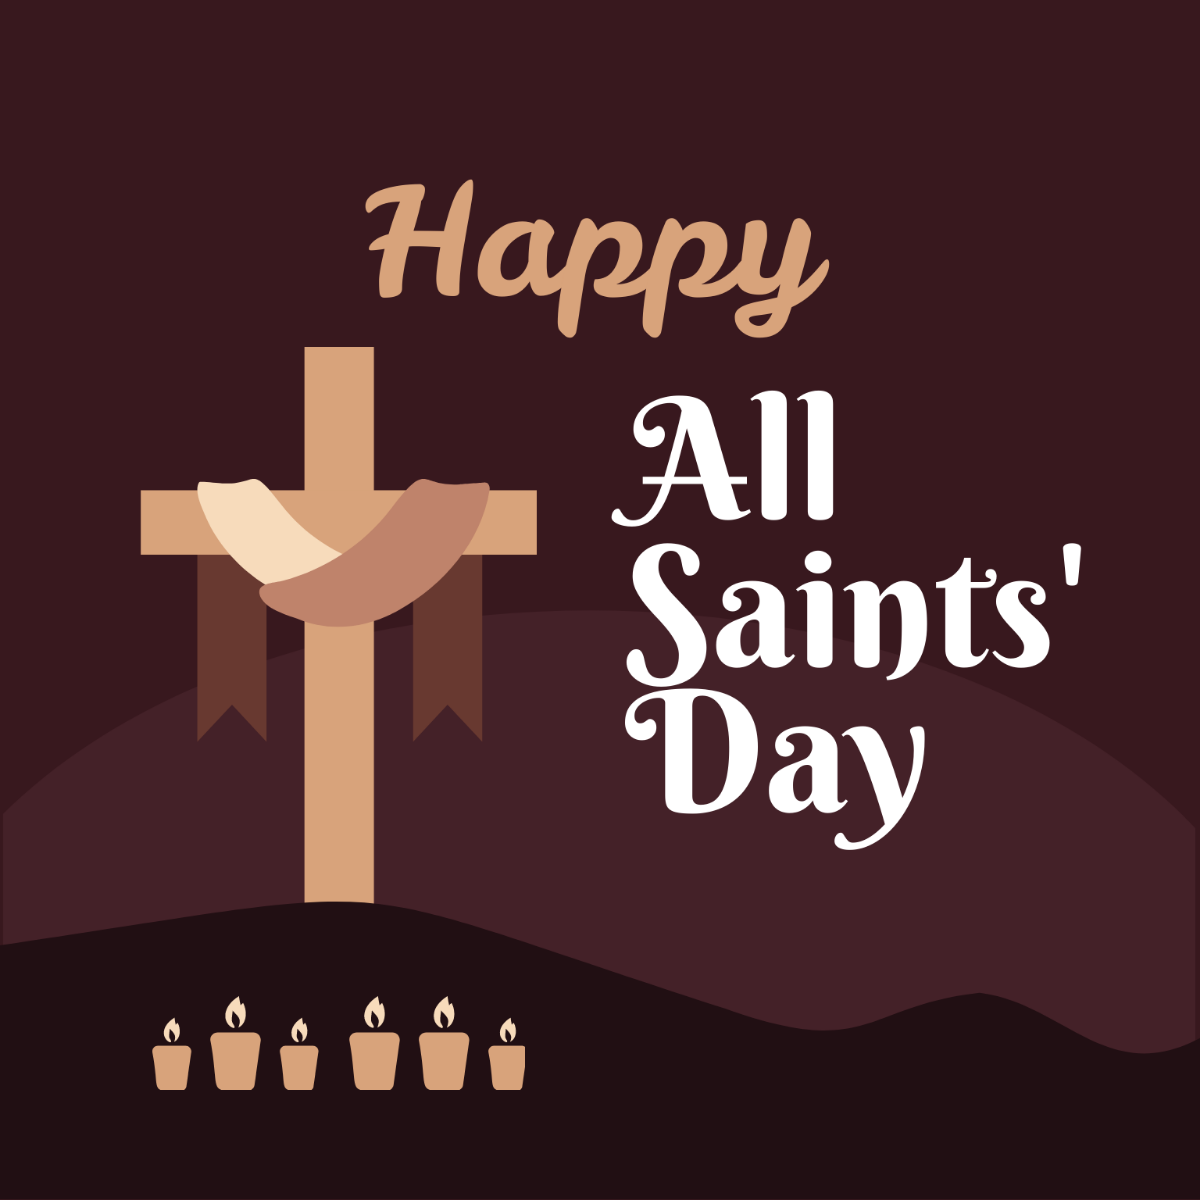 Happy All Saints' Day Illustration Template